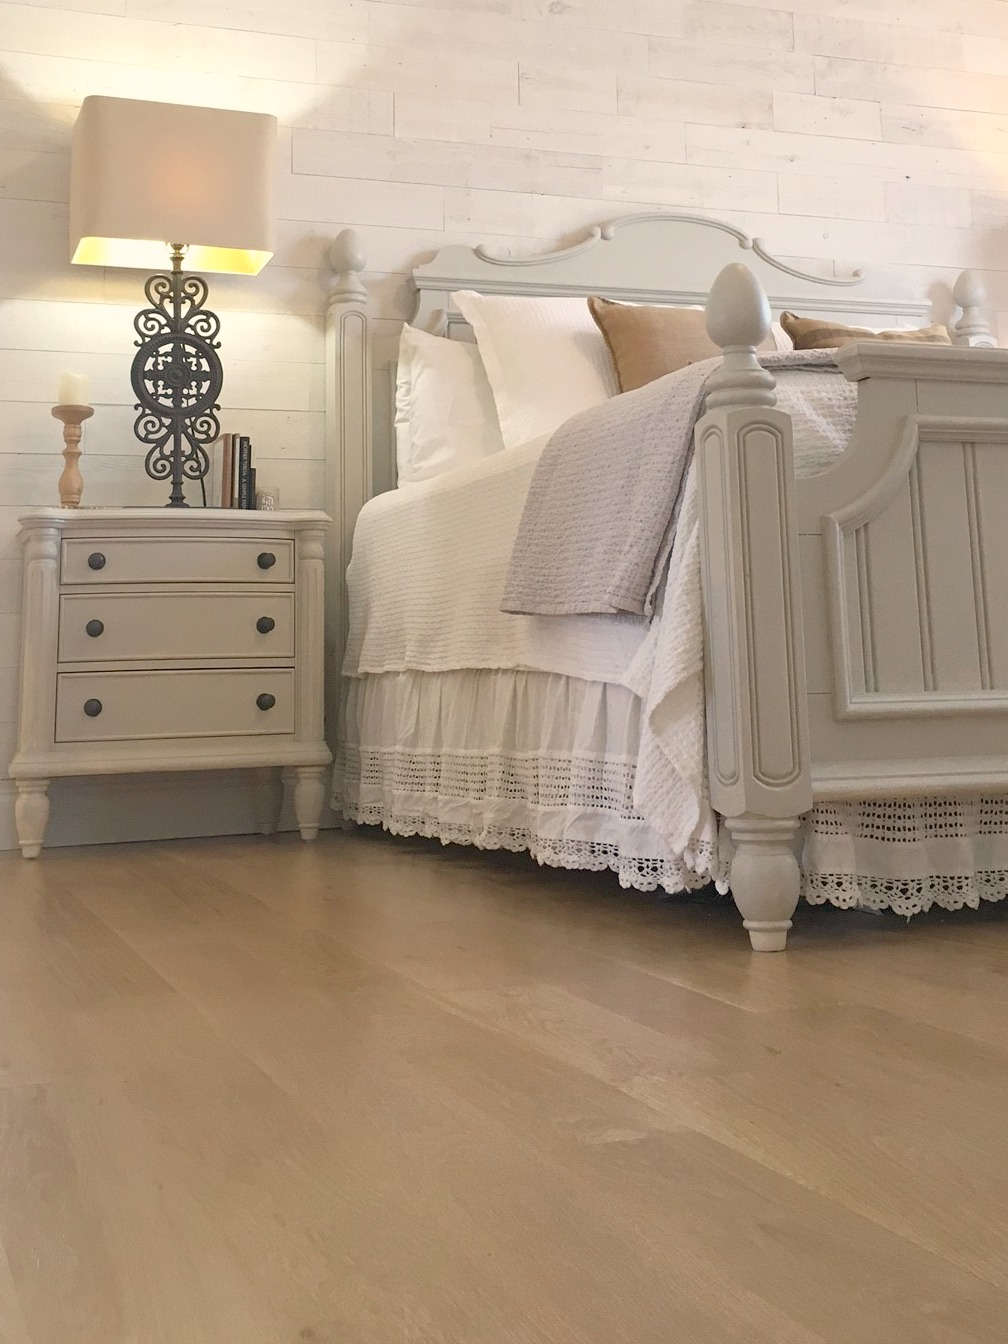 My serene European country inspired bedroom with Stikwood (Hamptons) statement wall, white oak flooring, and bead board detailed furniture - Hello Lovely Studio.